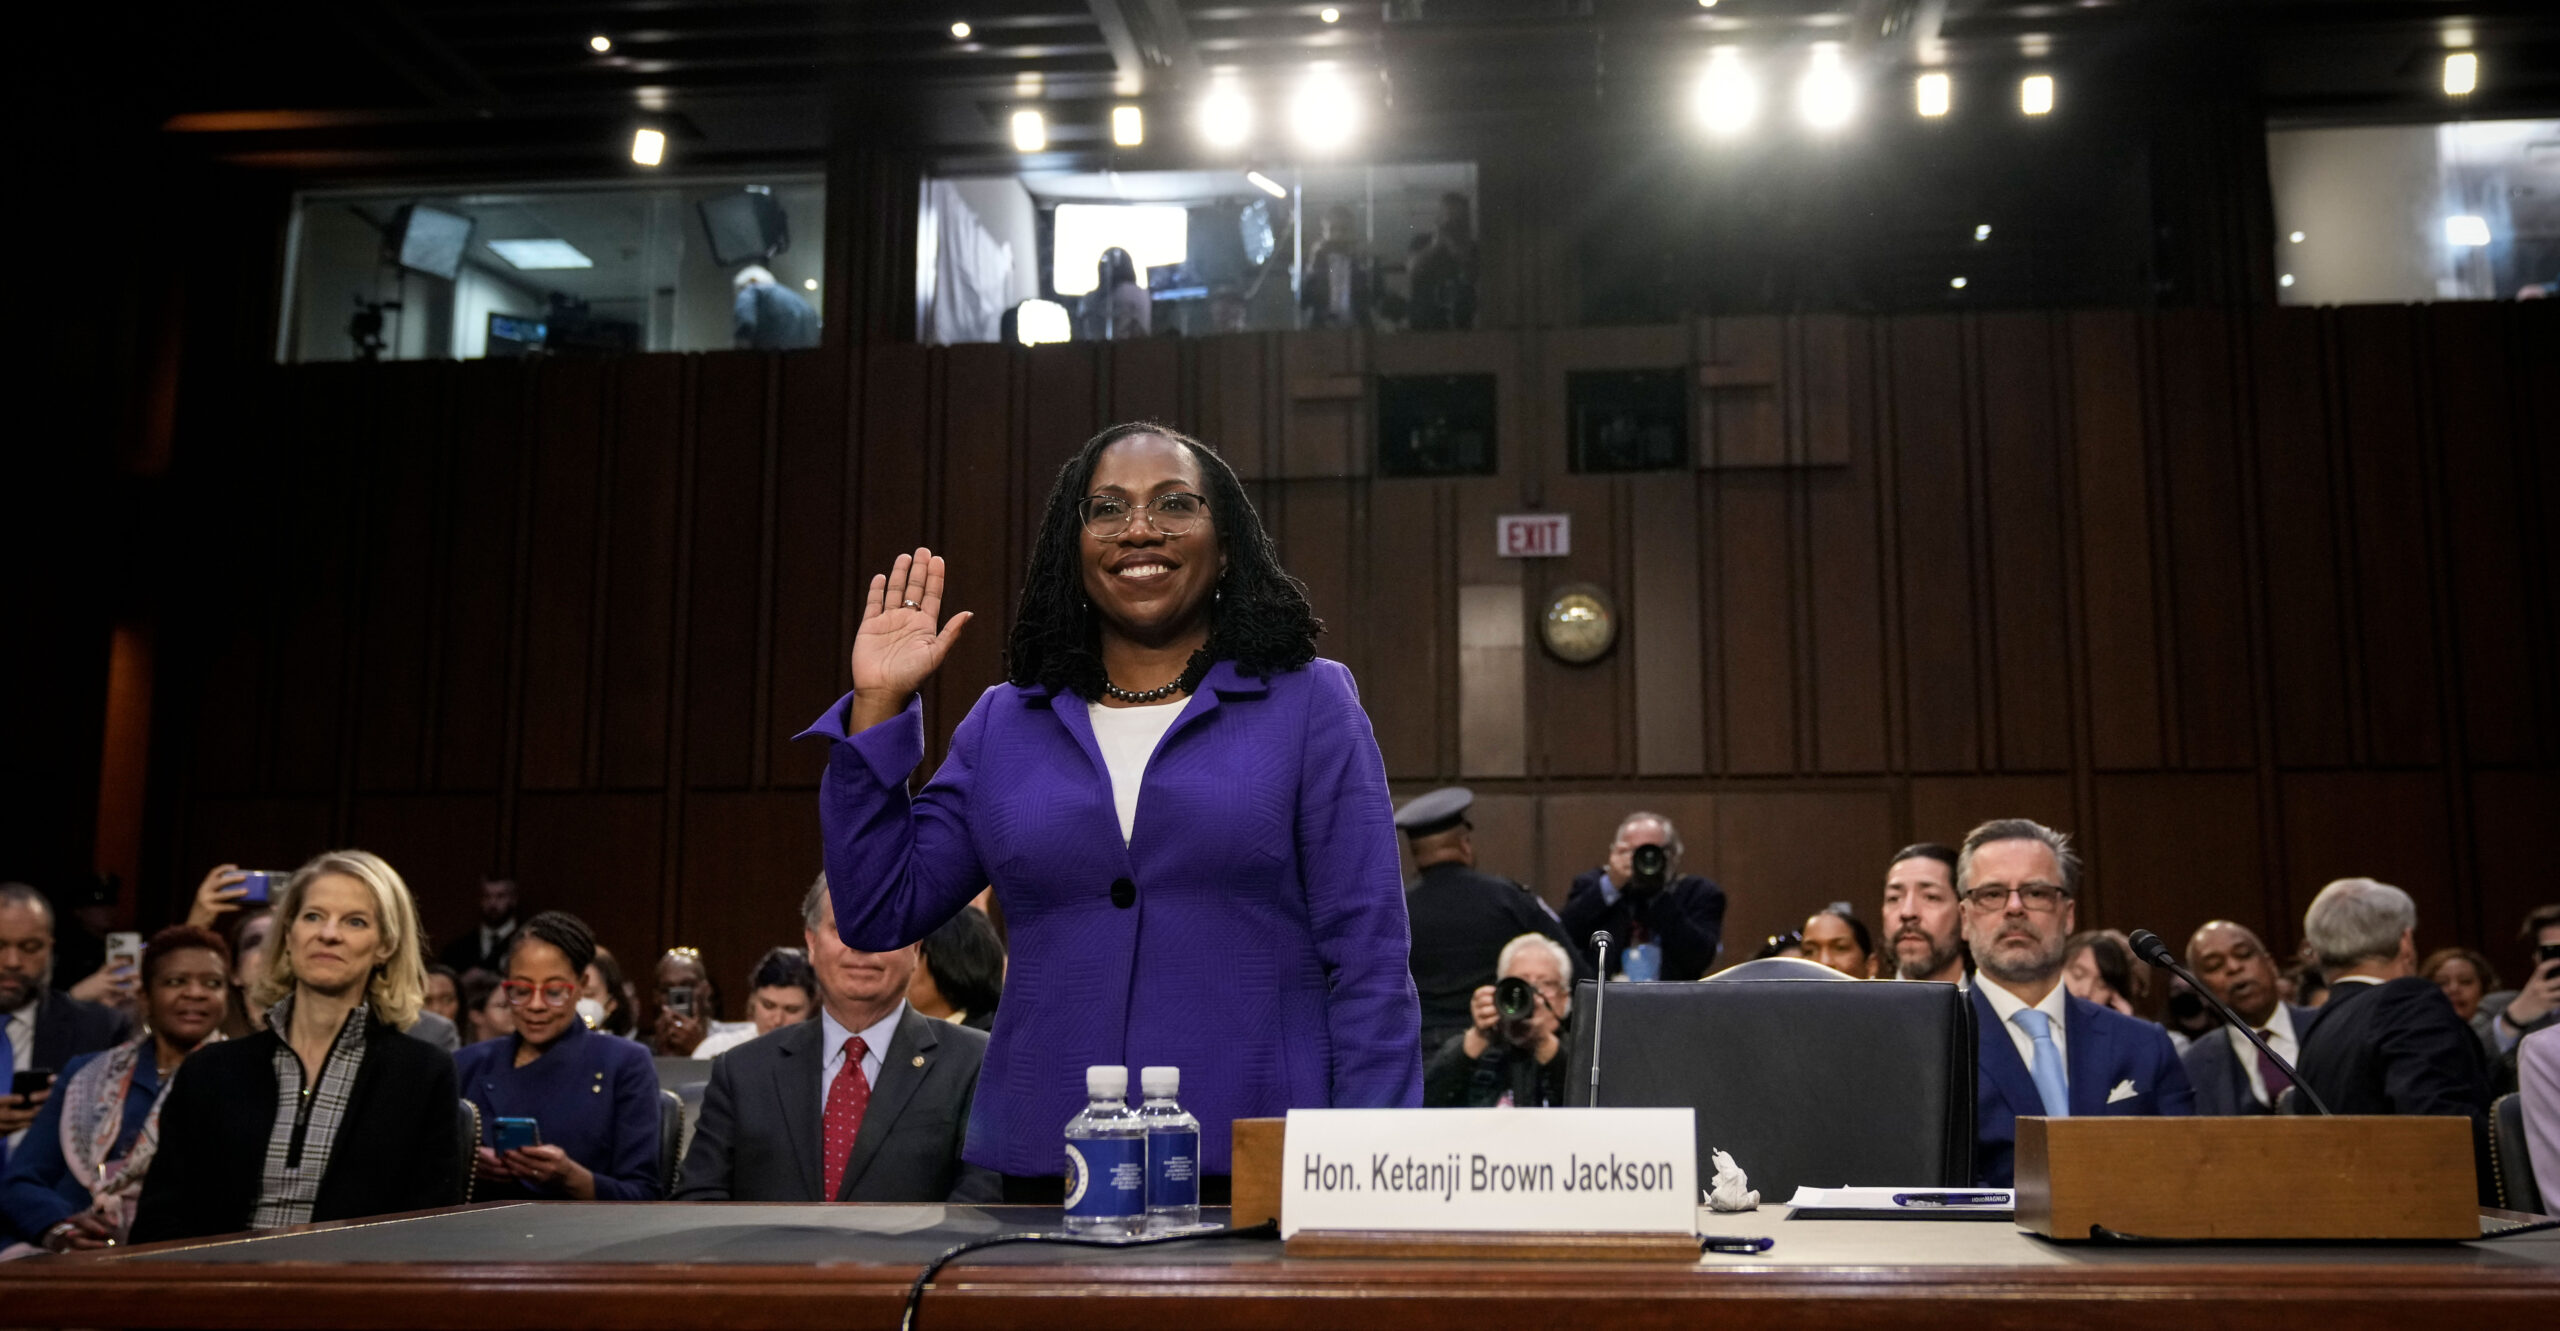 4 Key Moments on Day 1 of Judge Jackson's Supreme Court Confirmation Hearing